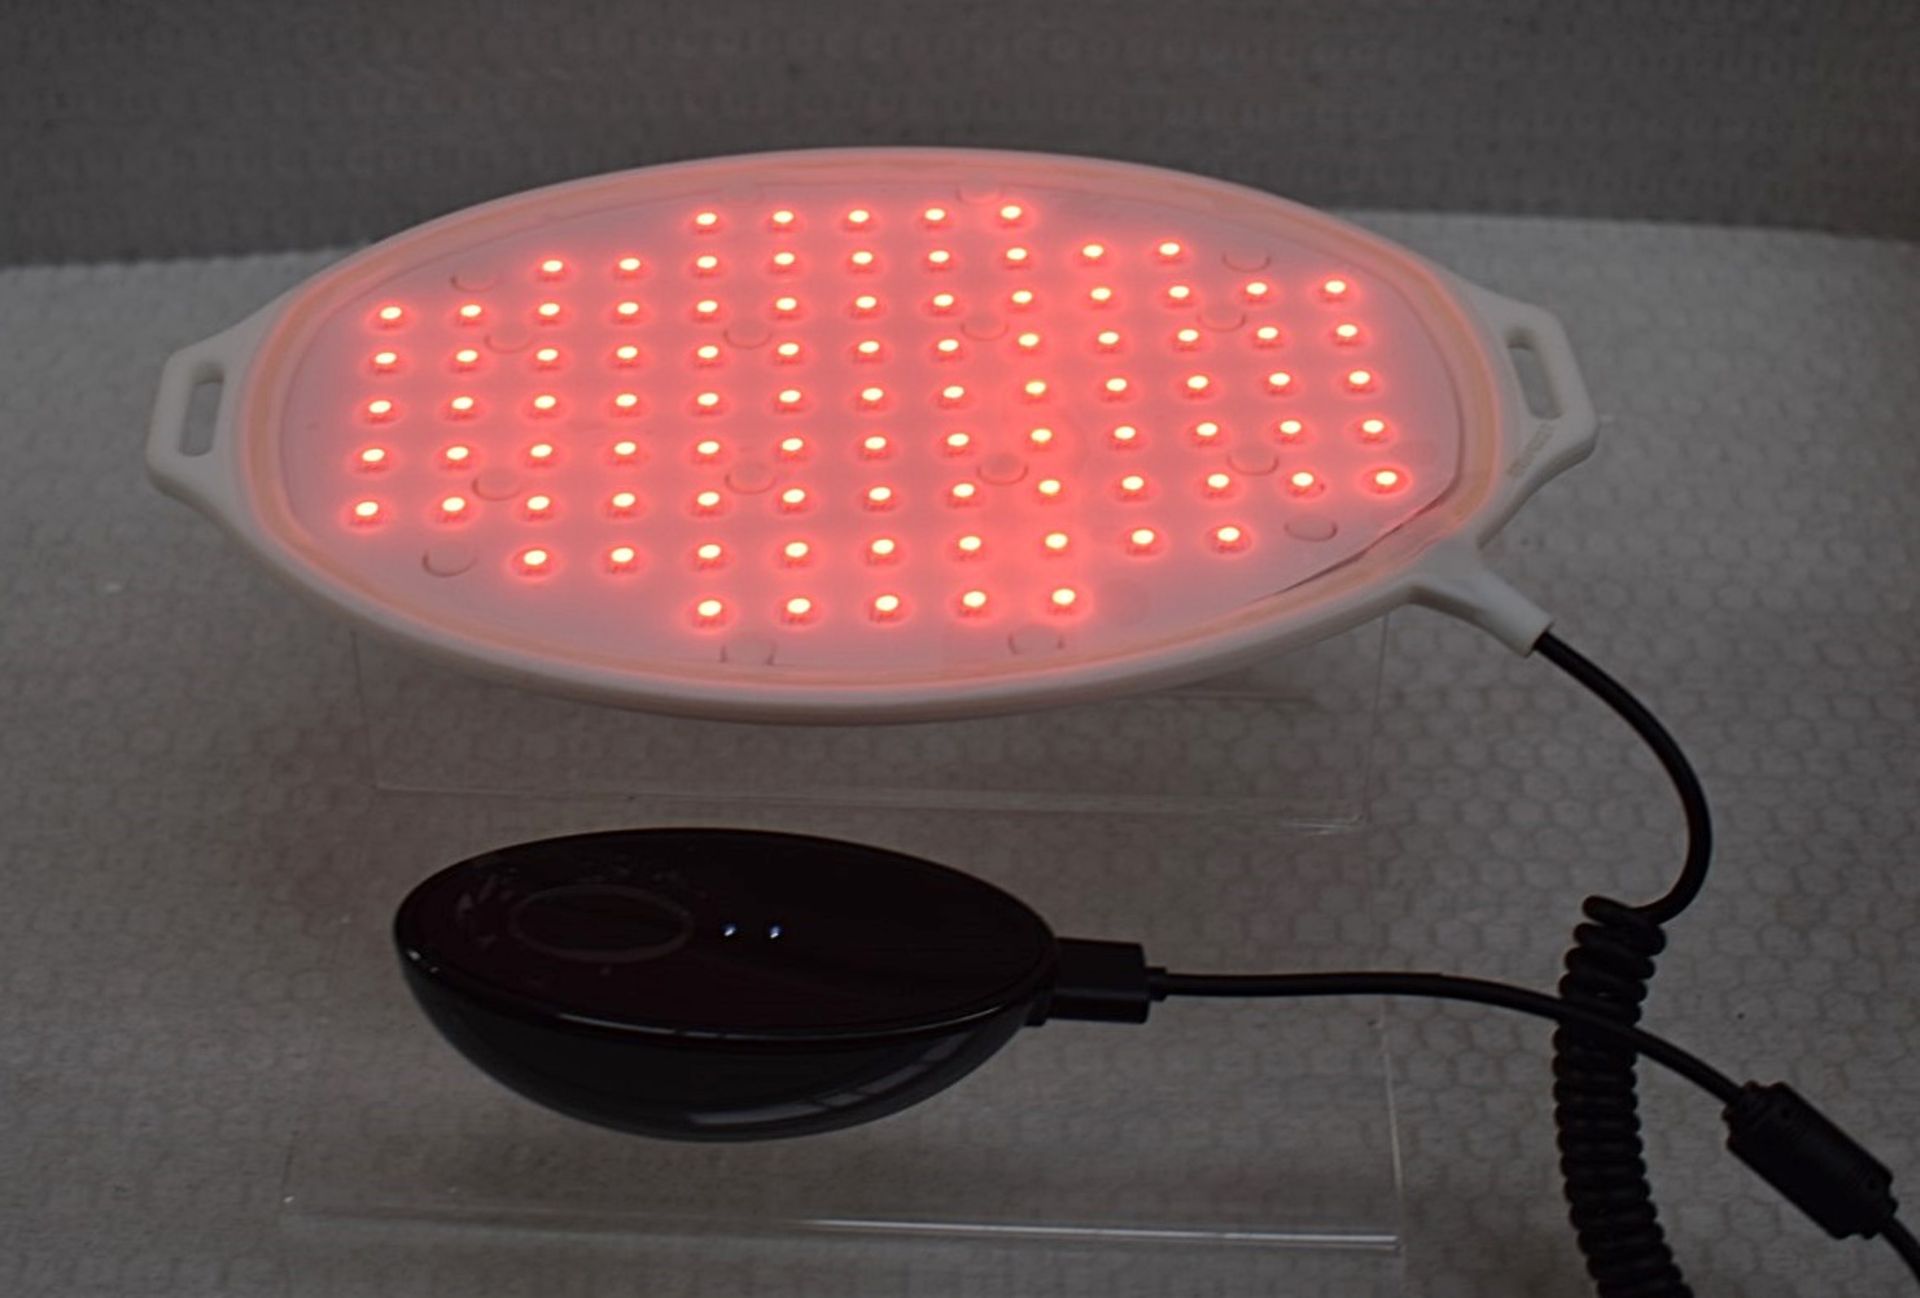 1 x THE LIGHT SALON 'Boost' Anti-inflammatory LED Body Patch - Original Price £375.00 - Unused Boxed - Image 5 of 9